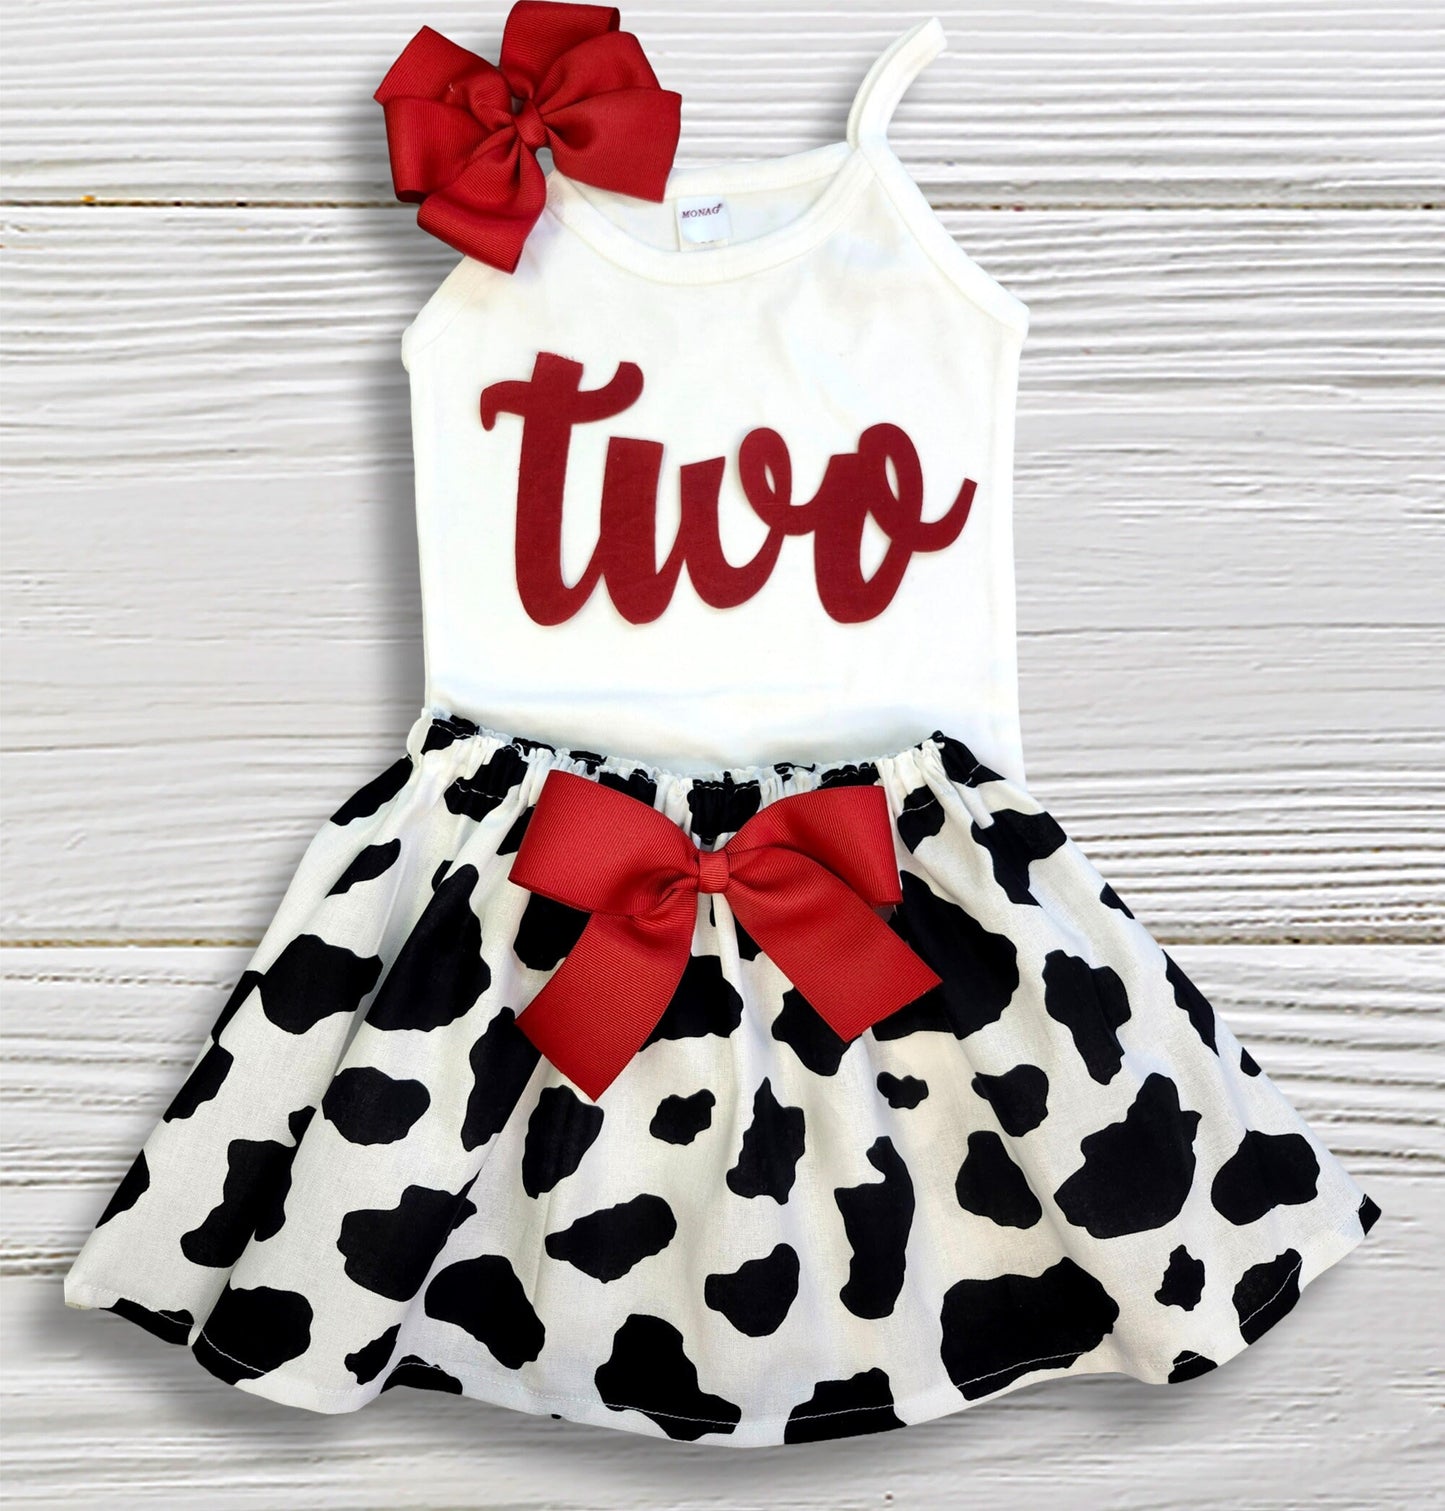 Cow girl birthday outfit, Cow skirt, Baby girl personalized age cow clothes set, Girls birthday outfit, Skirt Shirt cow outfit